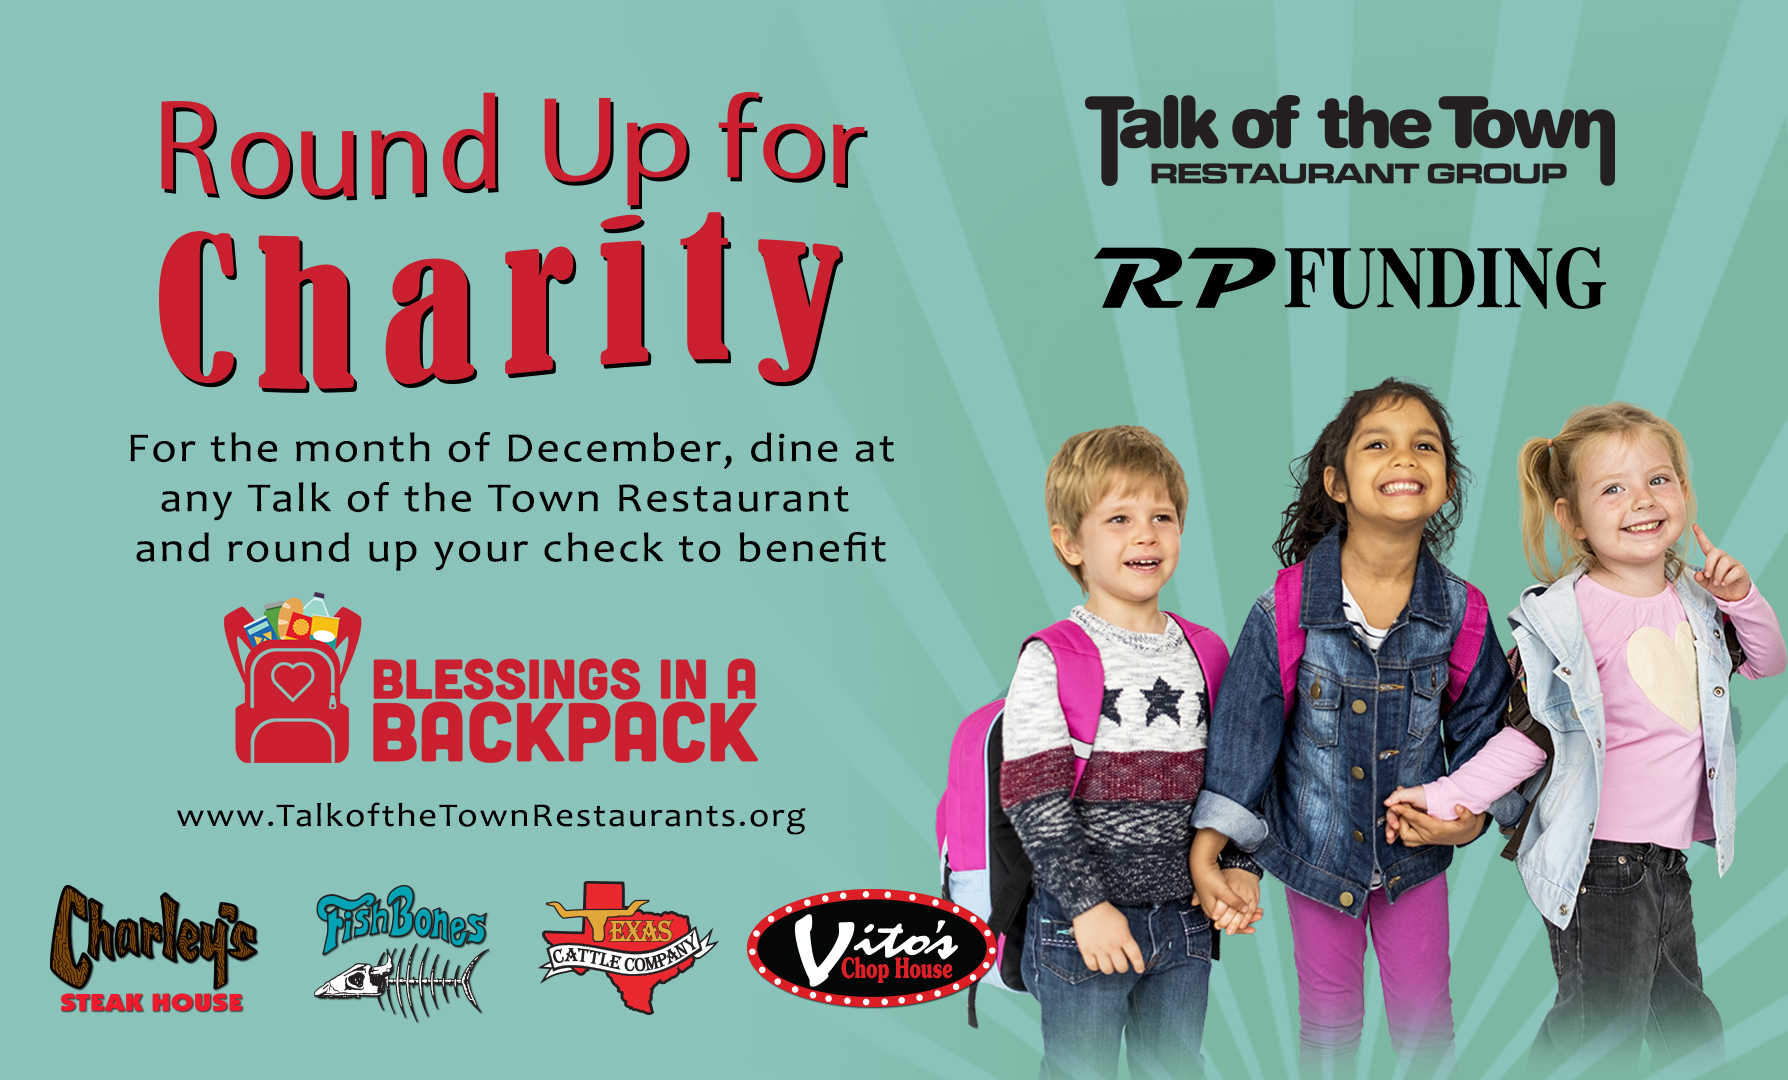 Round Up Your Check at Talk of the Town Restaurants to Support Blessings in a Backpack